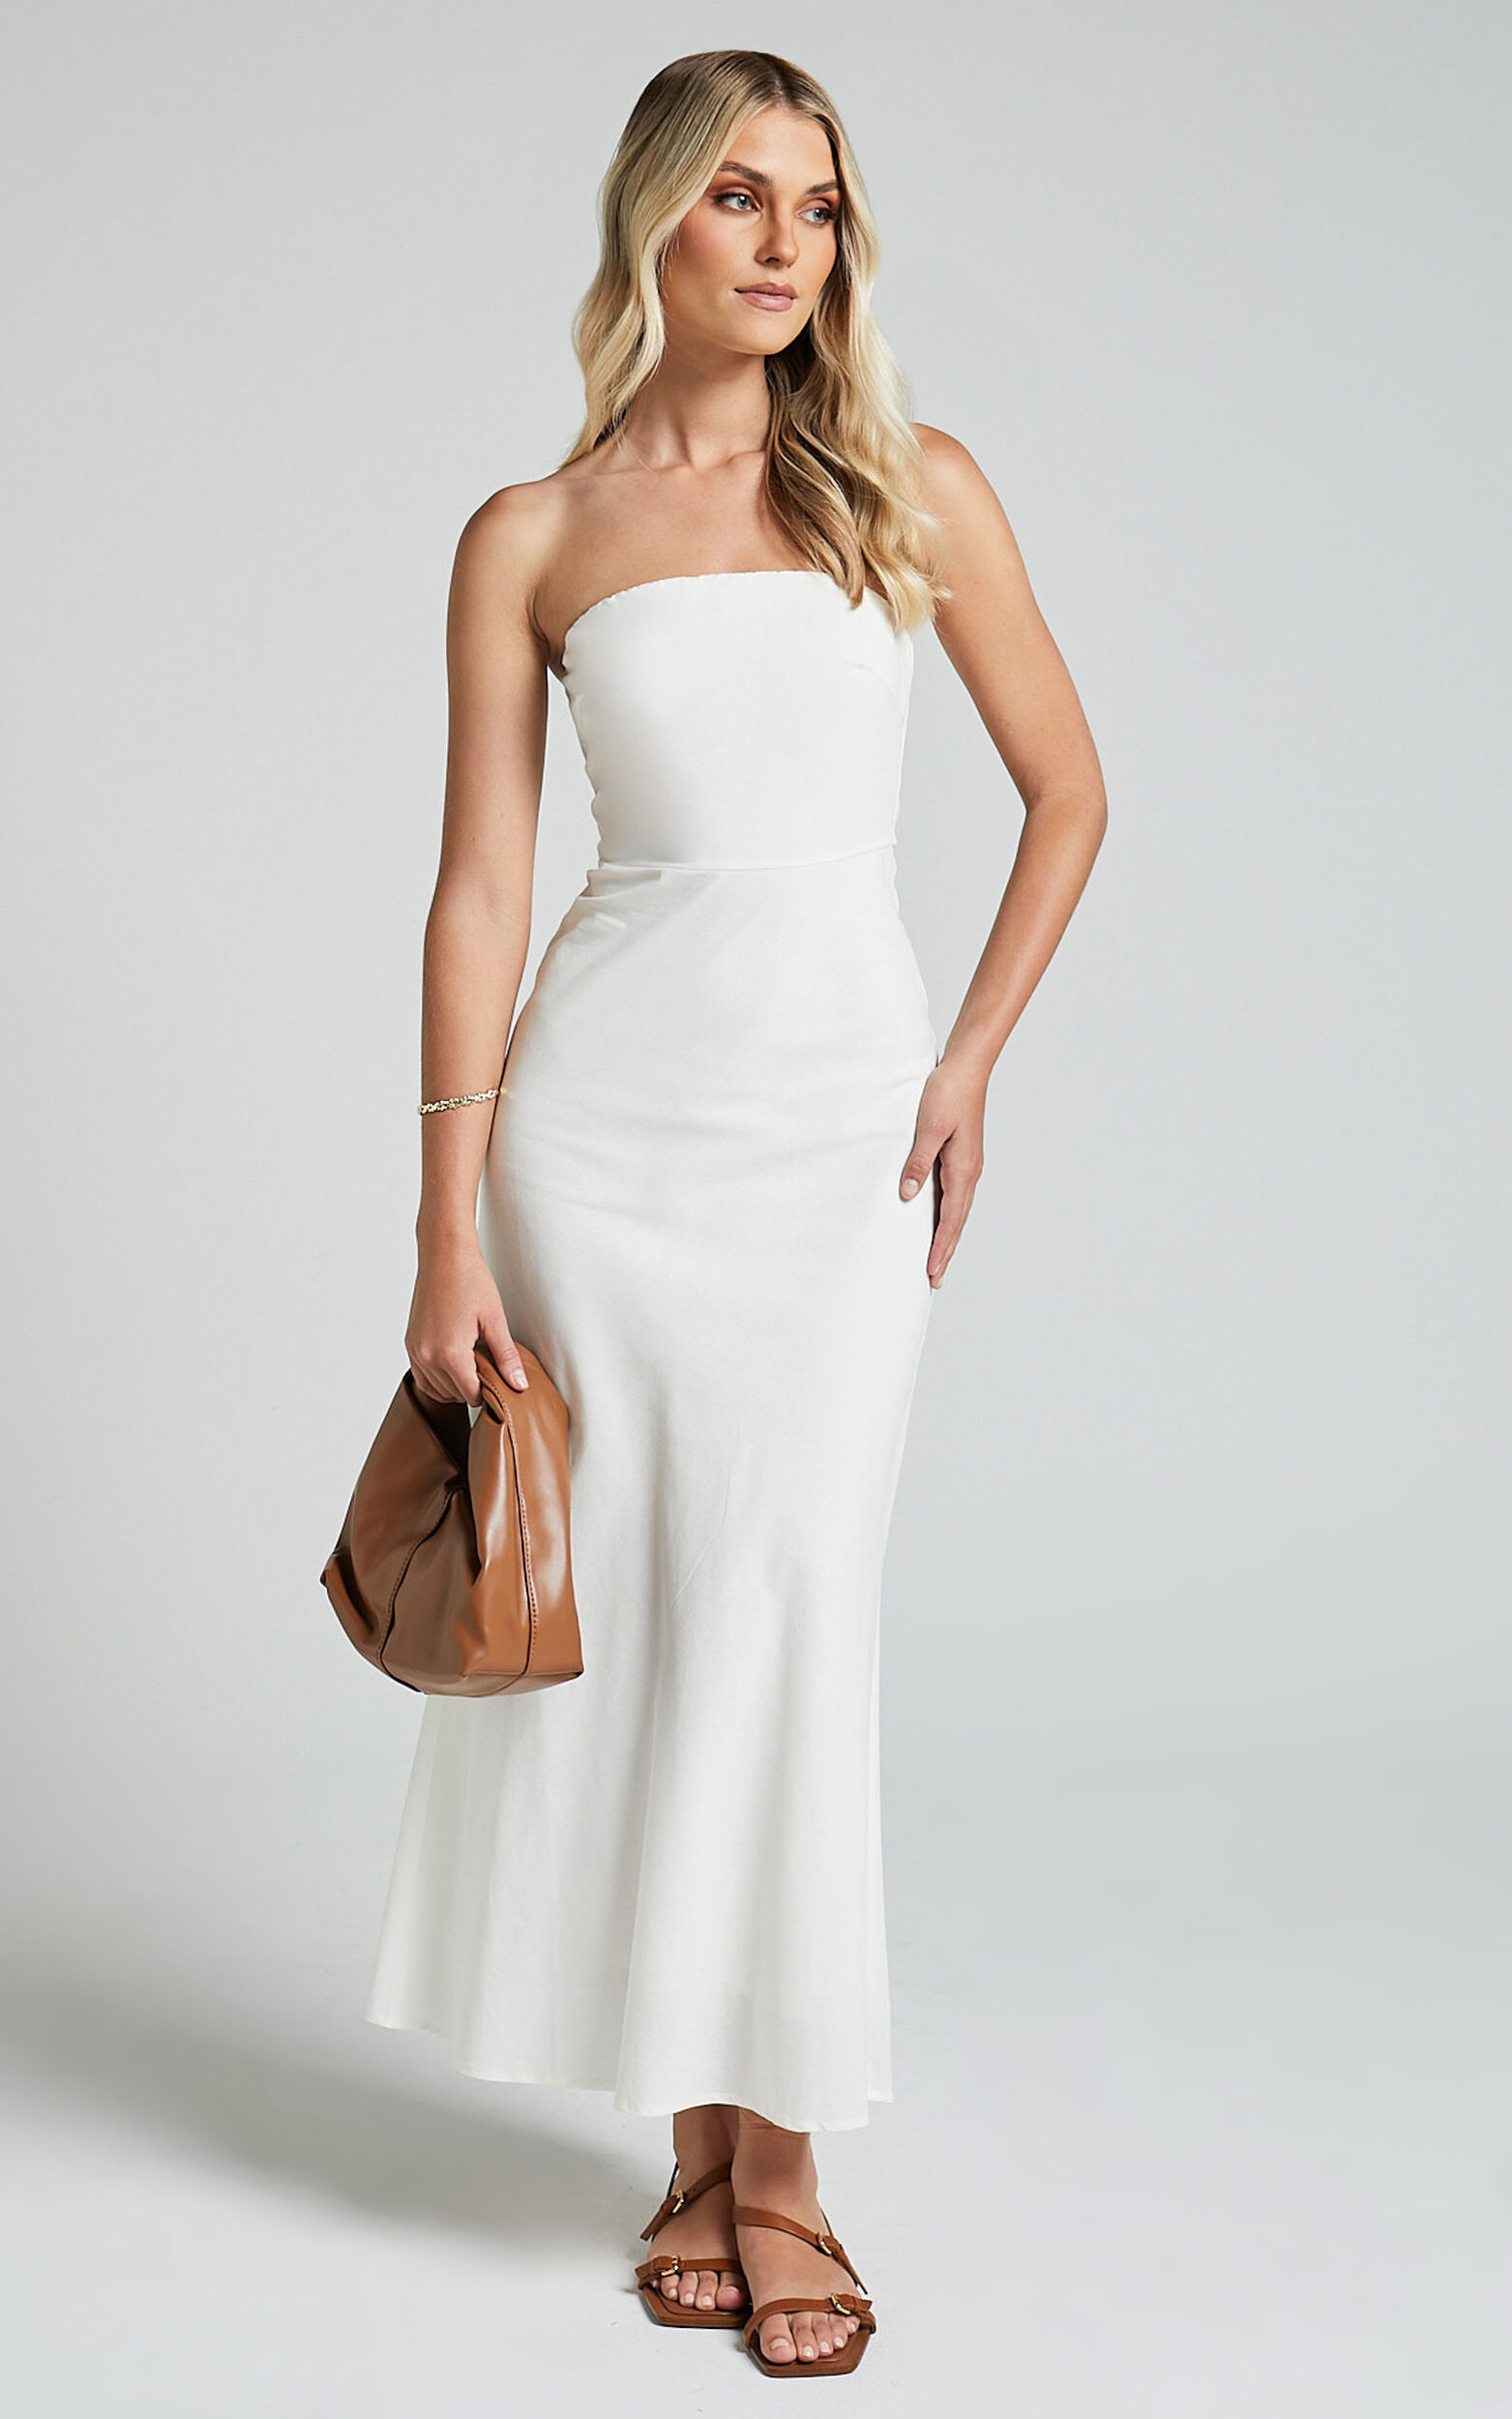 Zeita Maxi Dress - Strapless Fit and Flare Dress in White - 06, WHT1